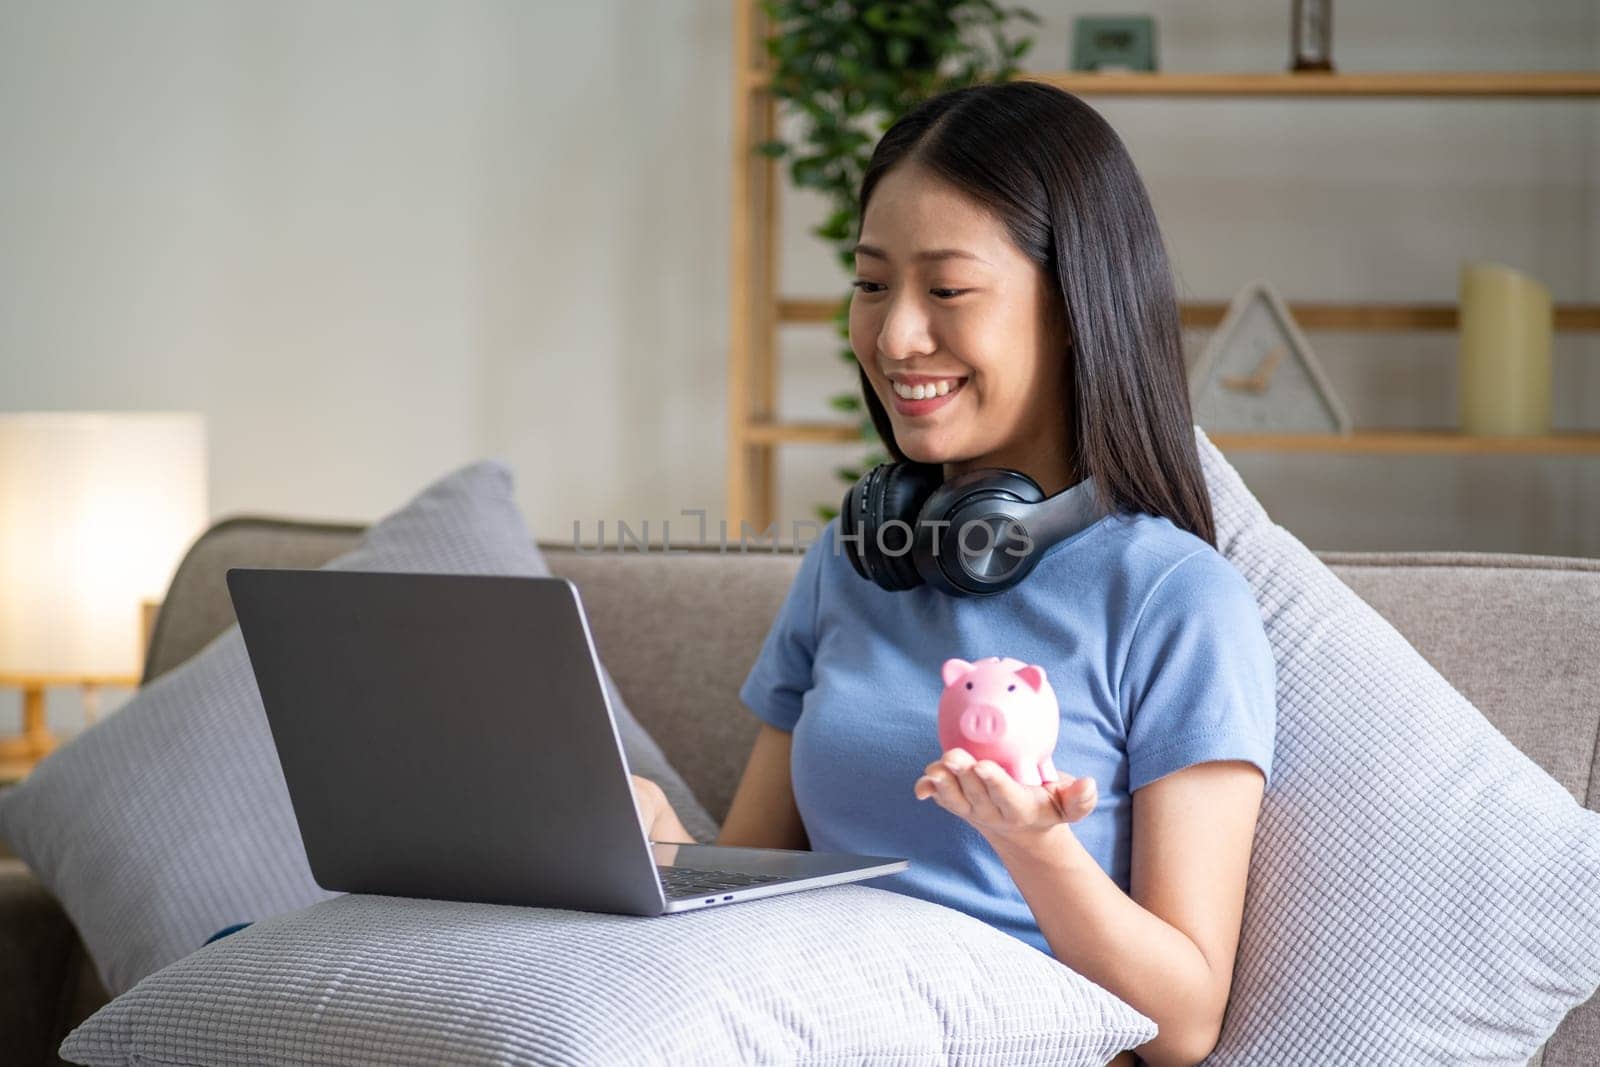 Young smart Asian teenager putting coin in a piggy bank, happy young woman who puts coin in piggy bank for saving, investment economical. High quality photo